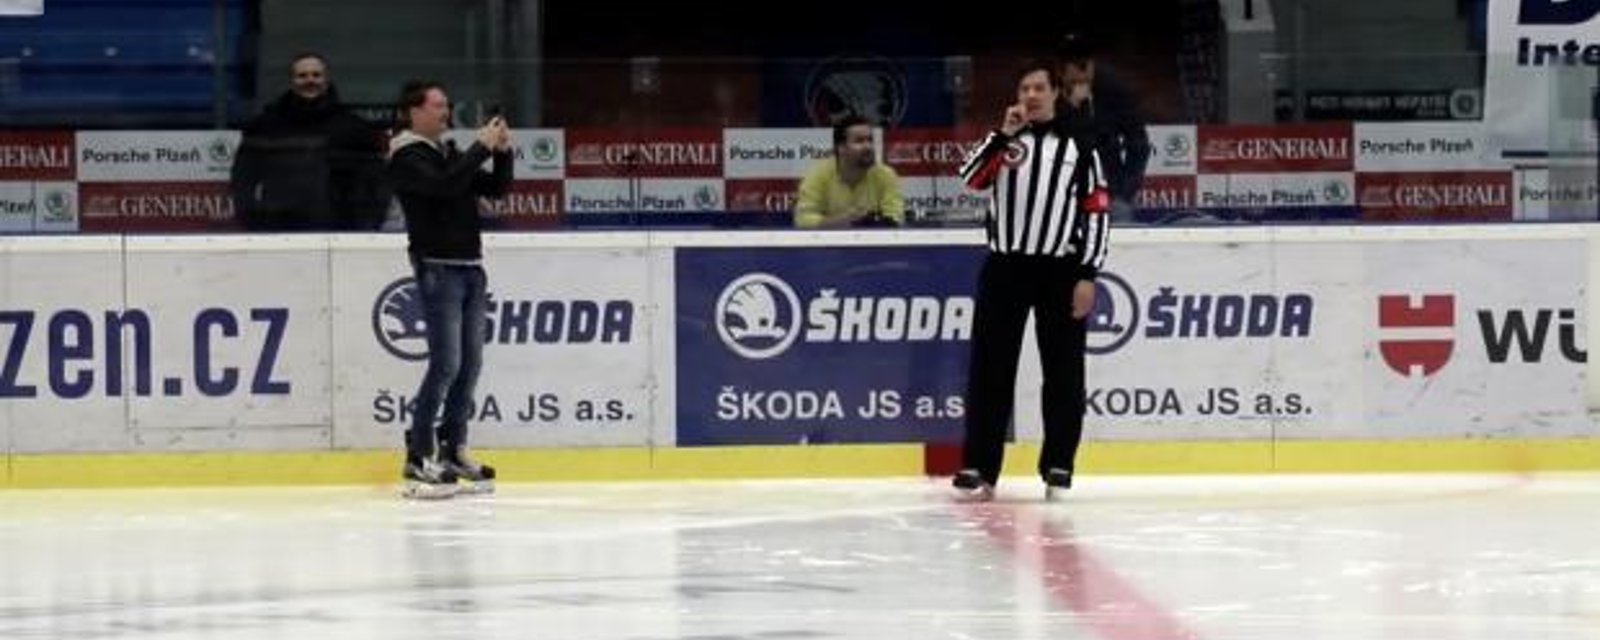 Referee steps up to sing anthem after singer doesn't show up 